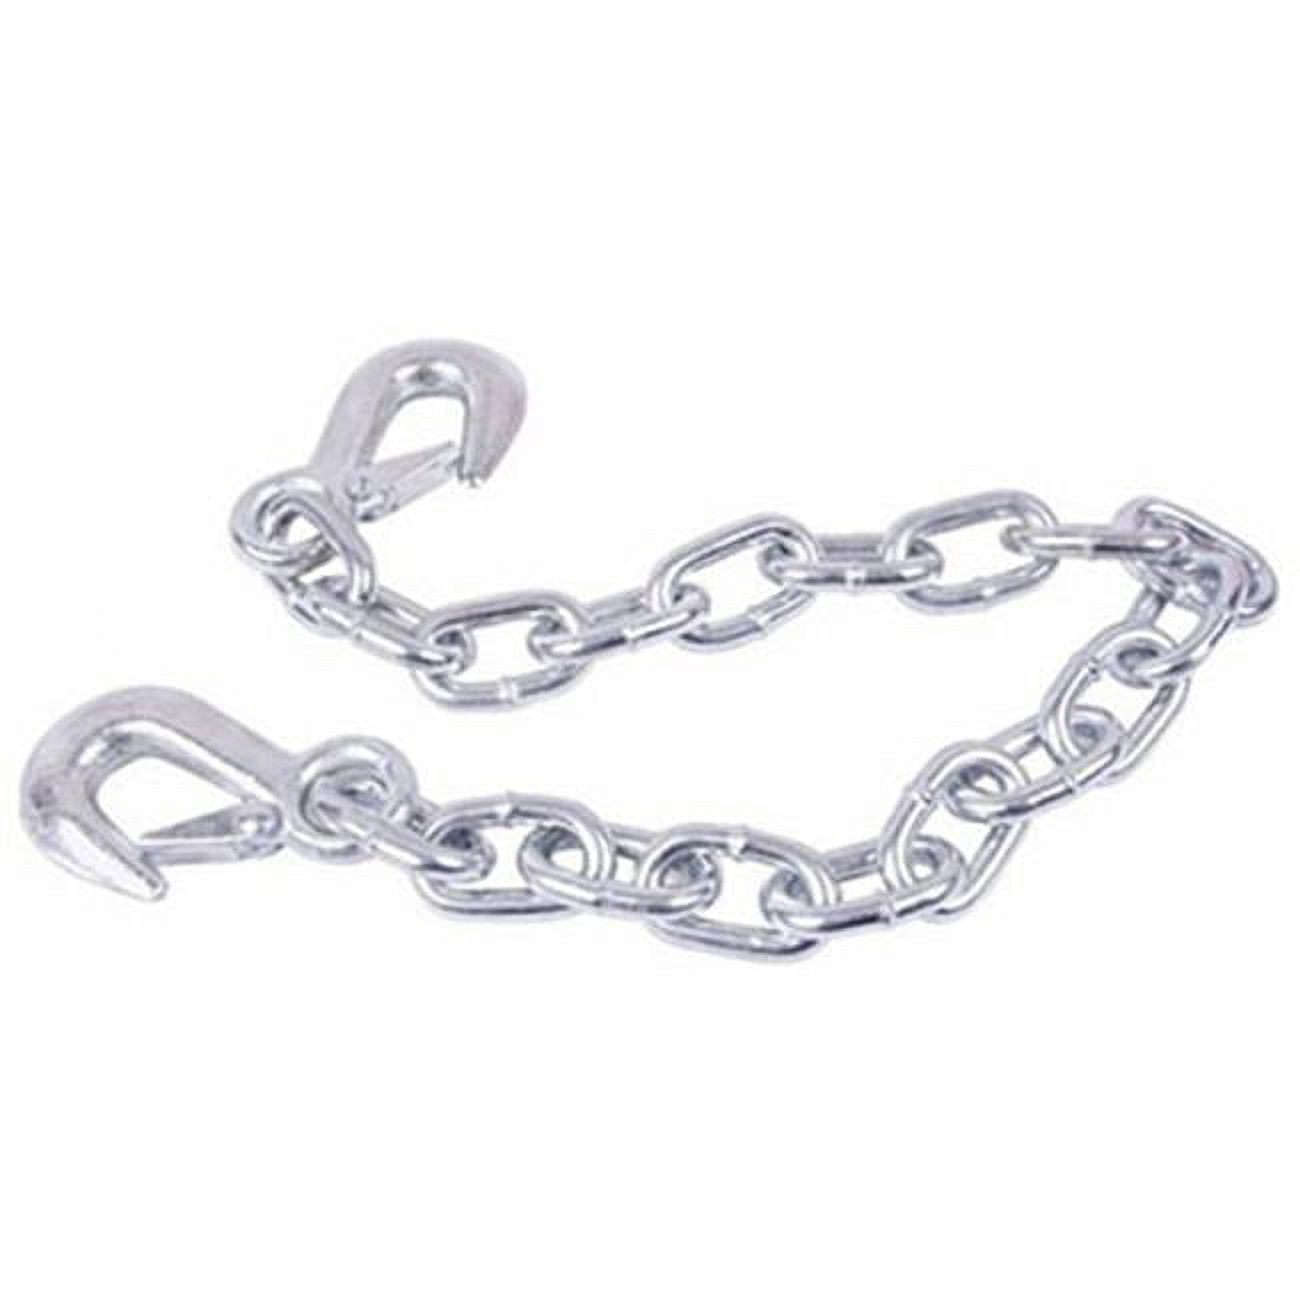 Trailer Heavy Duty Safety Chains Slip Hook Trailer Safety Chain 3500lbs  Towing Wire Ropes with Double Spring Clip Hooks for Trailer RV